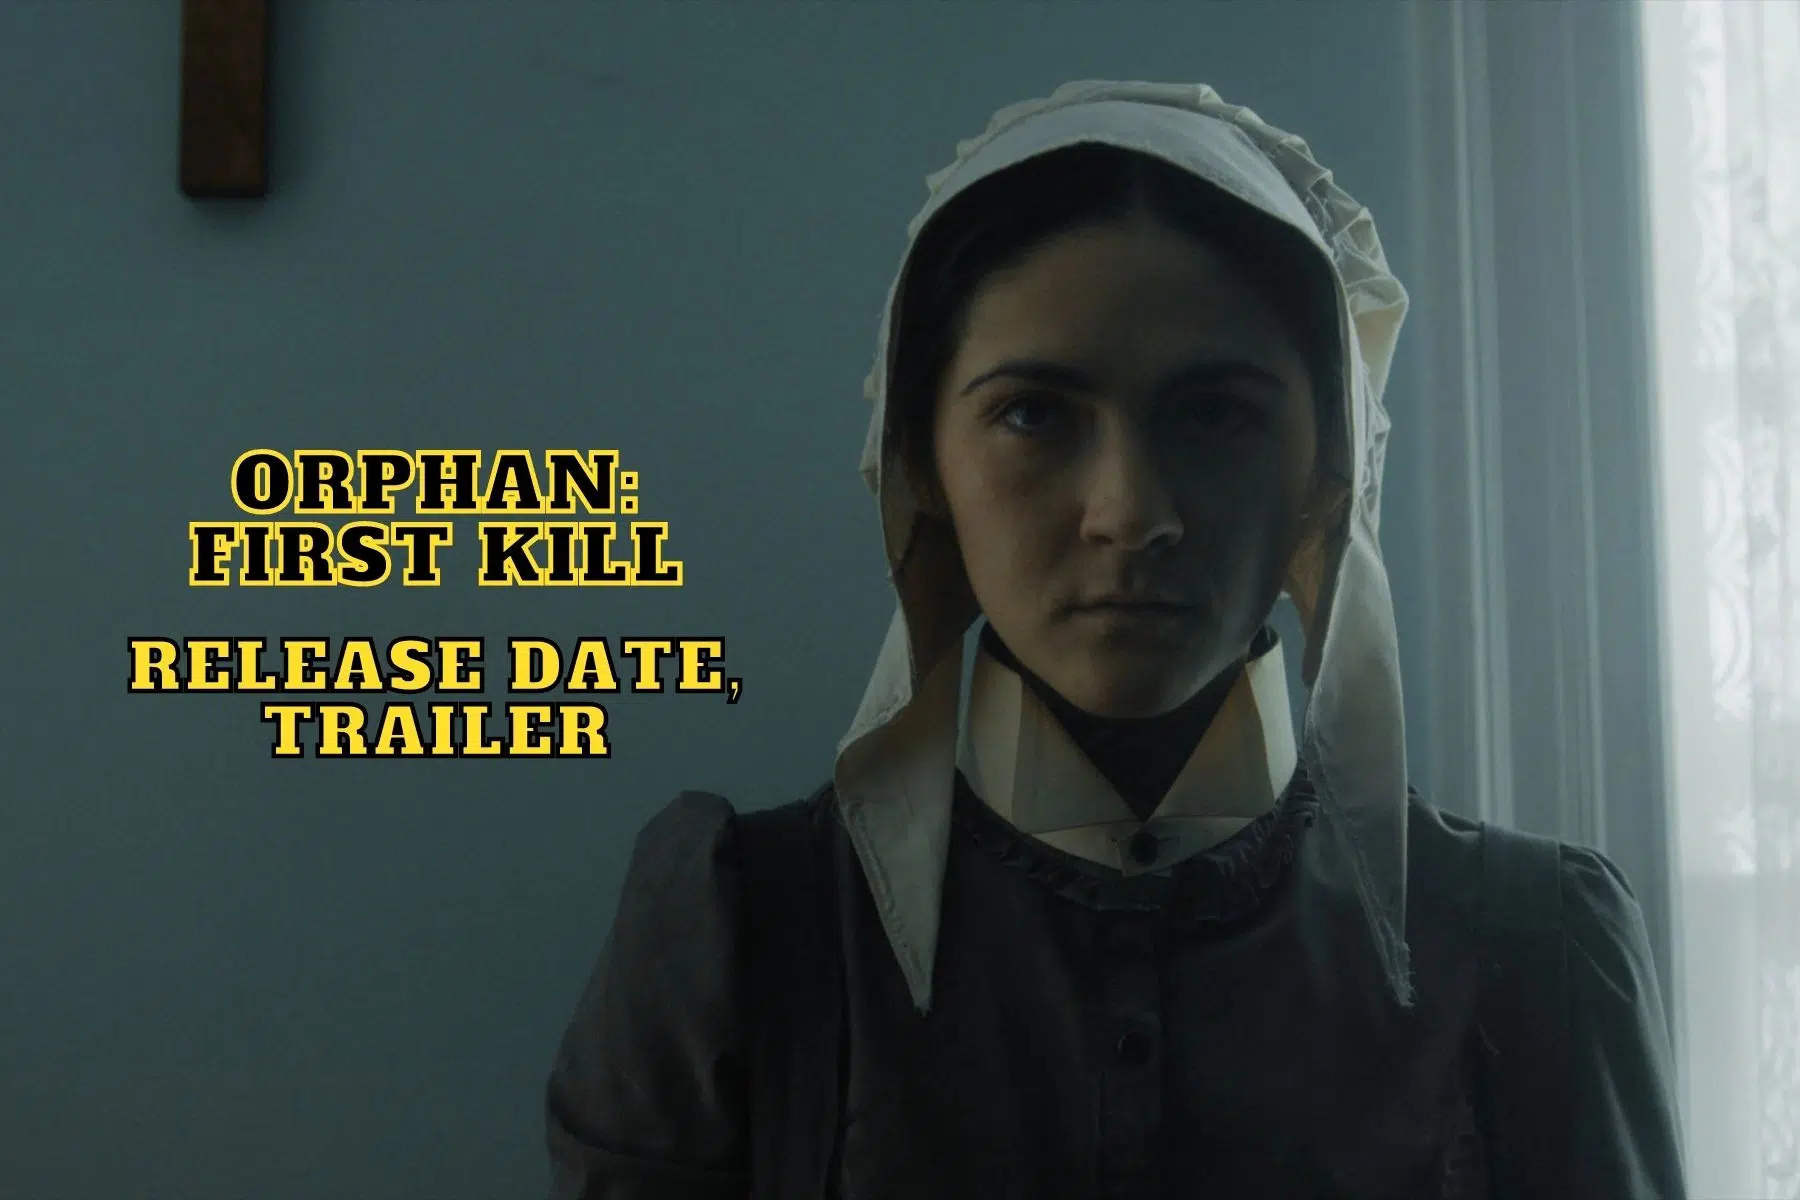 Orphan: First Kill Release Date, Trailer